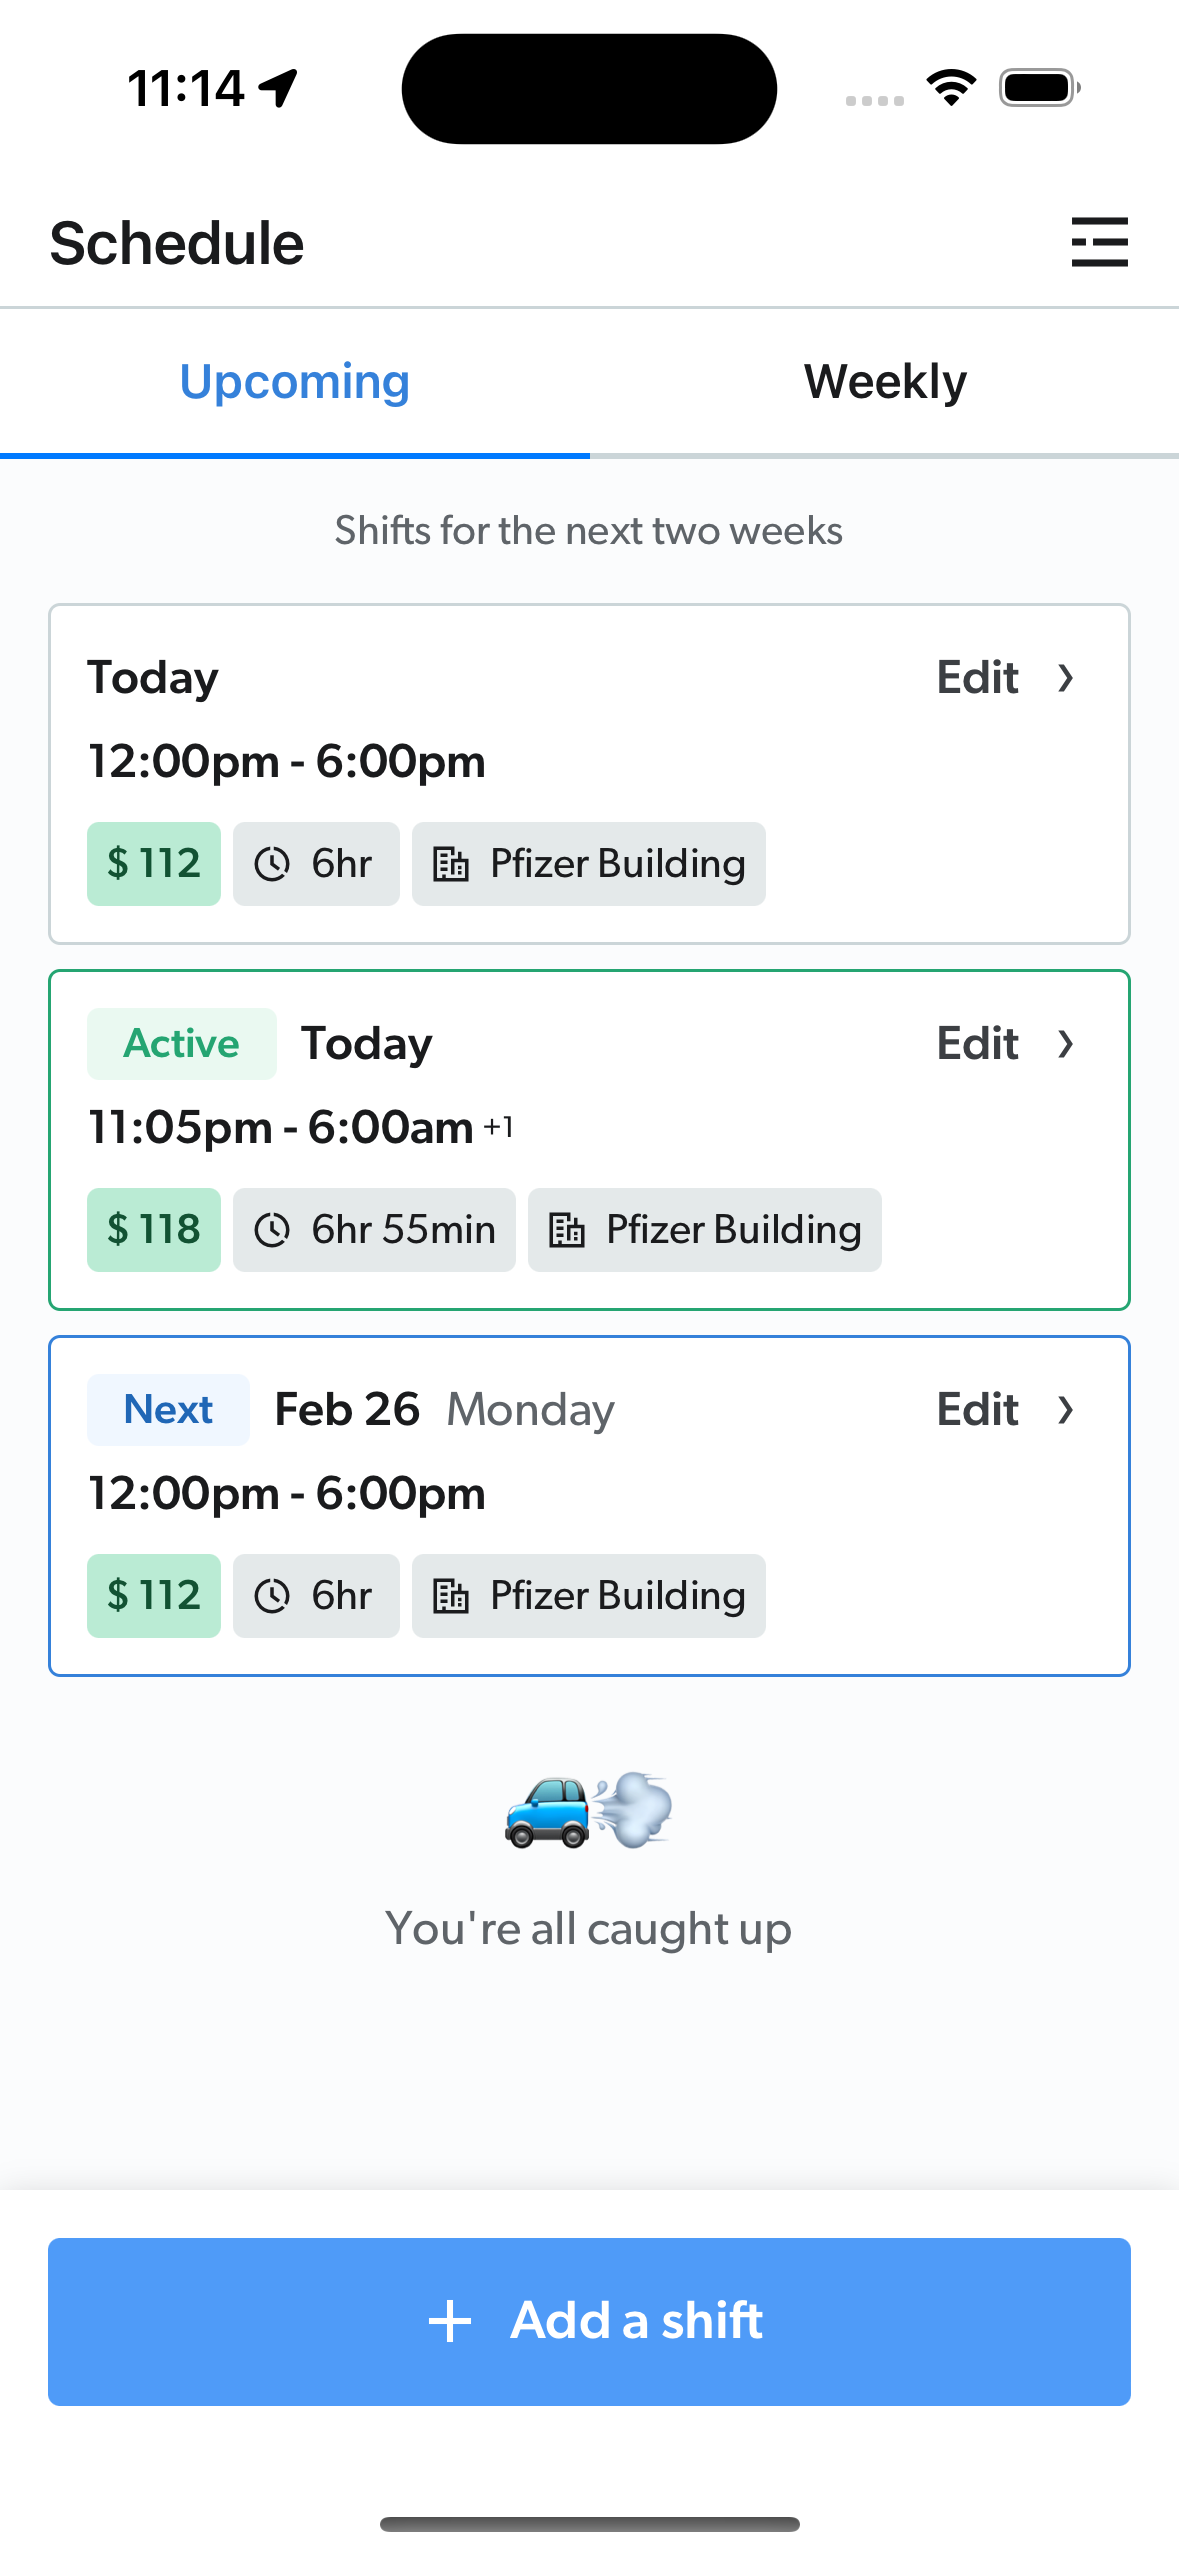 The driver app schedule page.